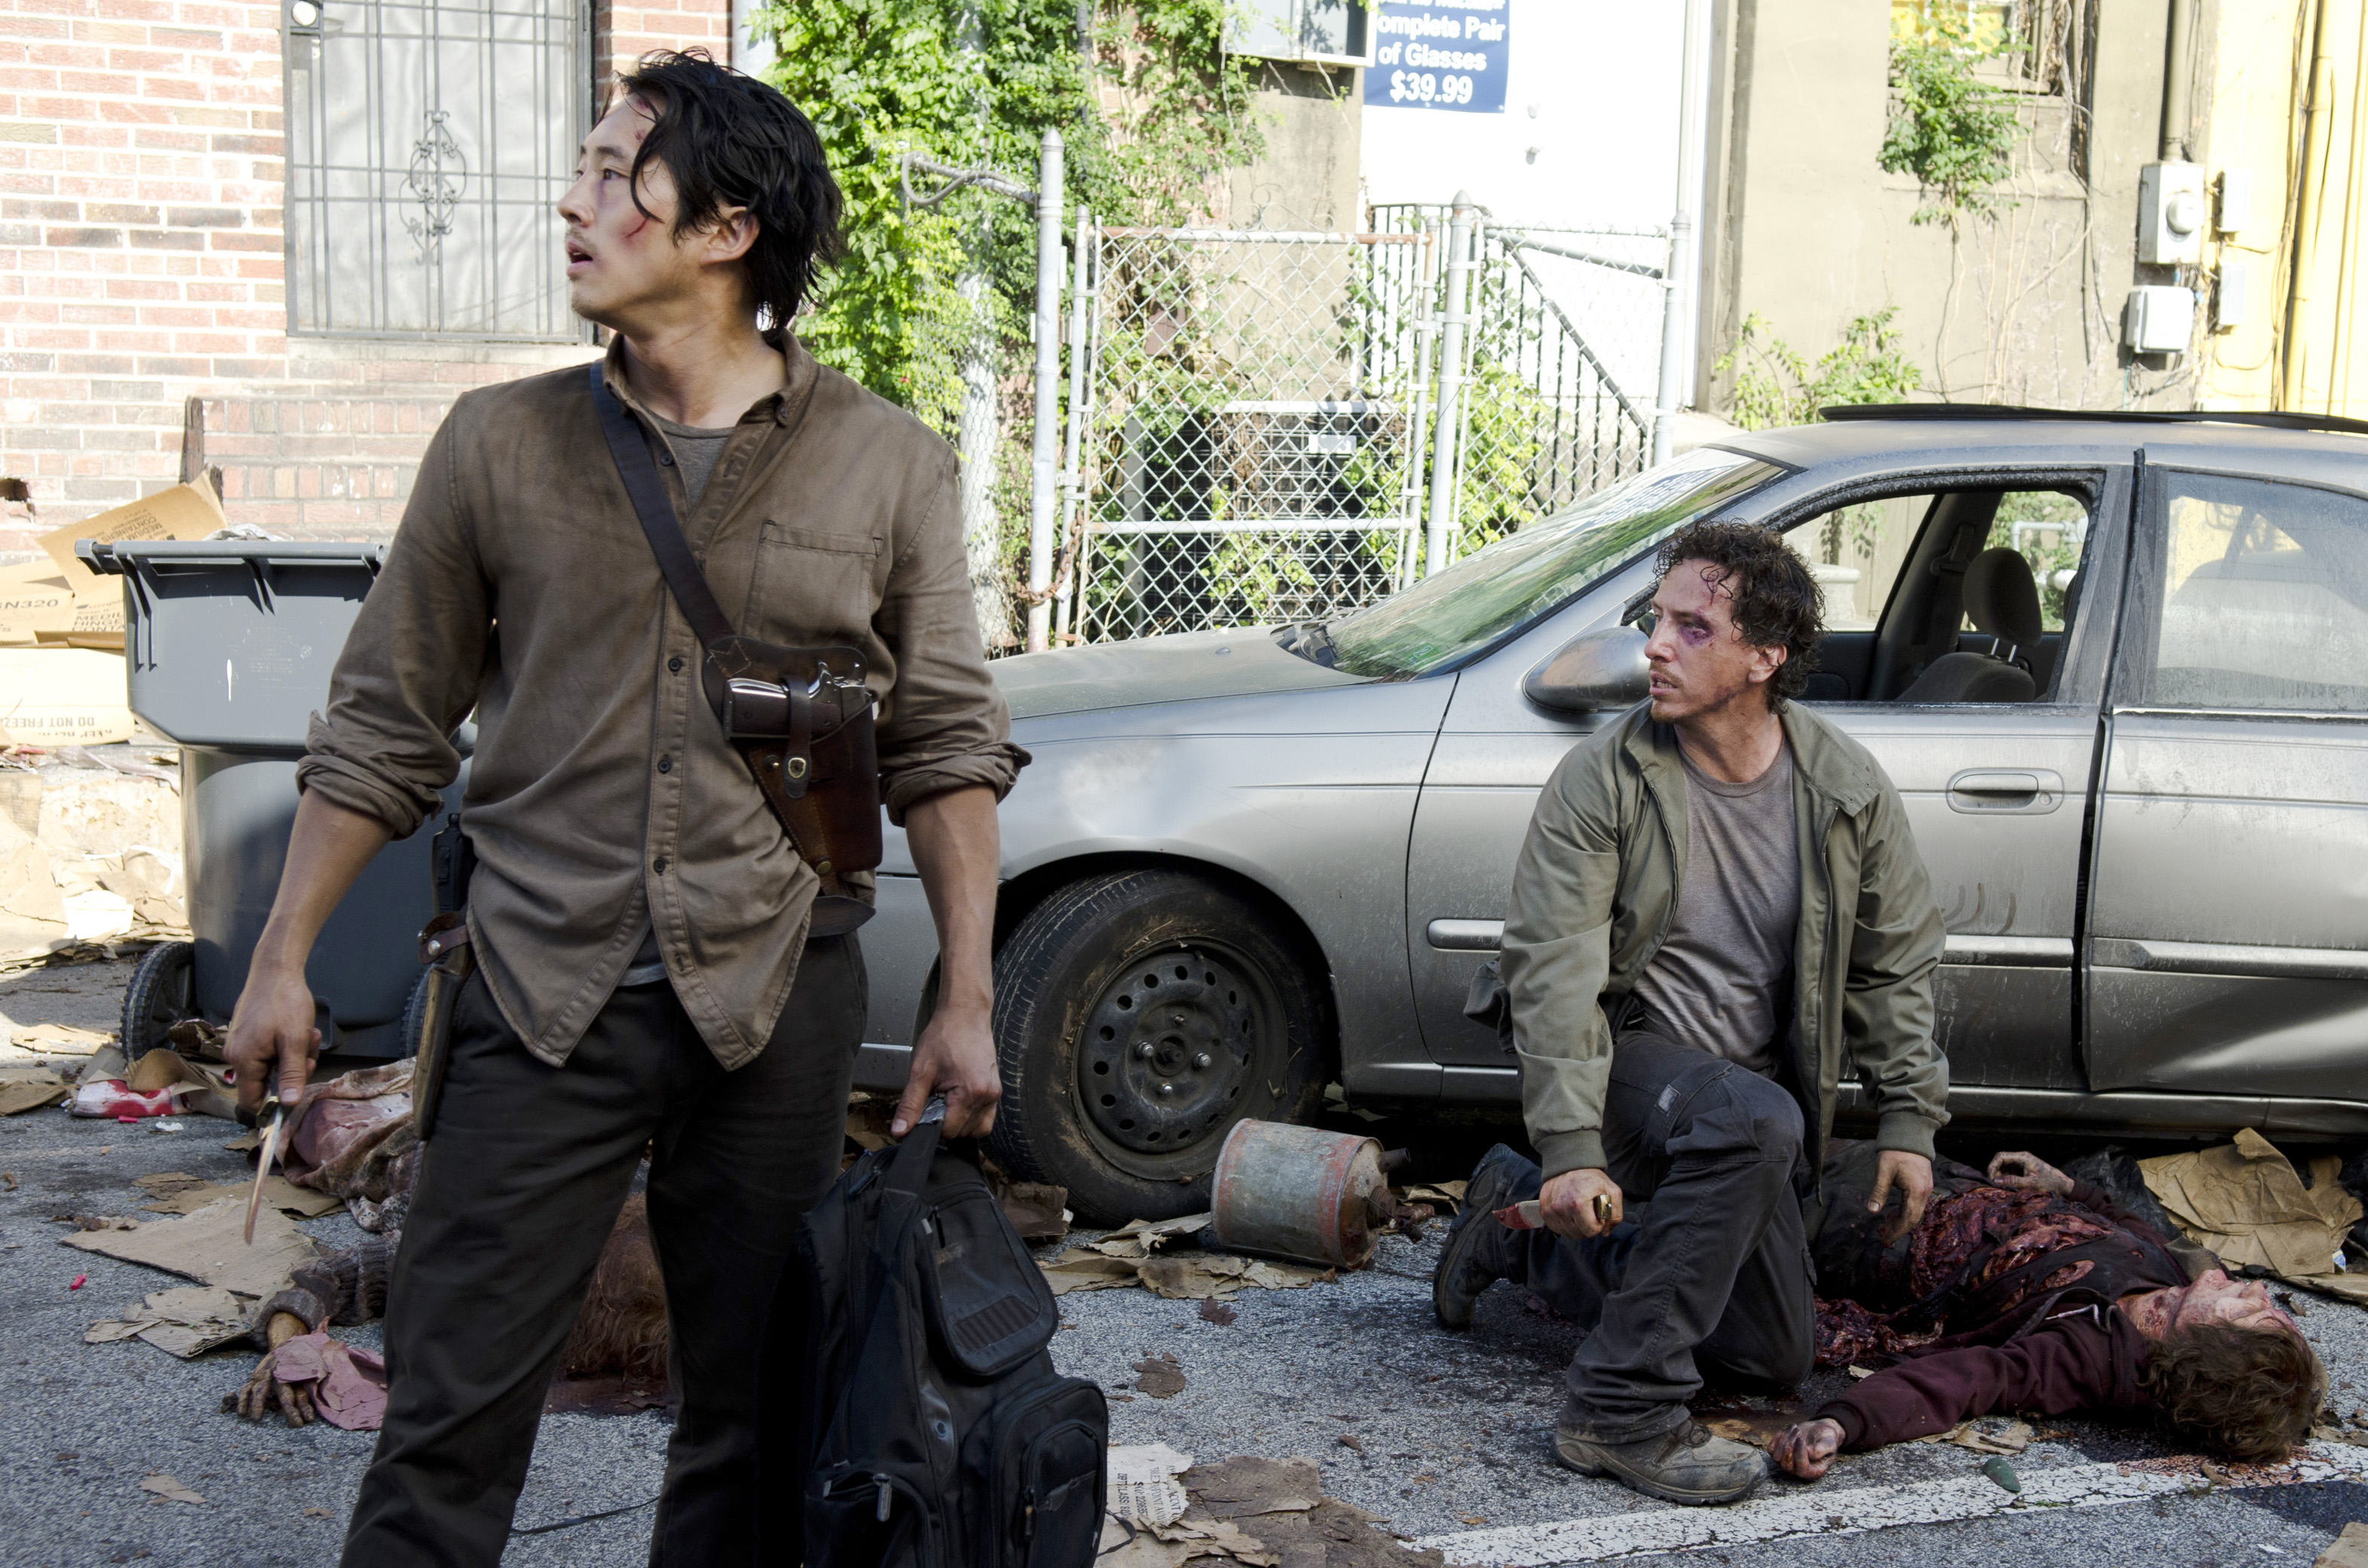 Michael Traynor and Steven Yeun in The Walking Dead (2010)